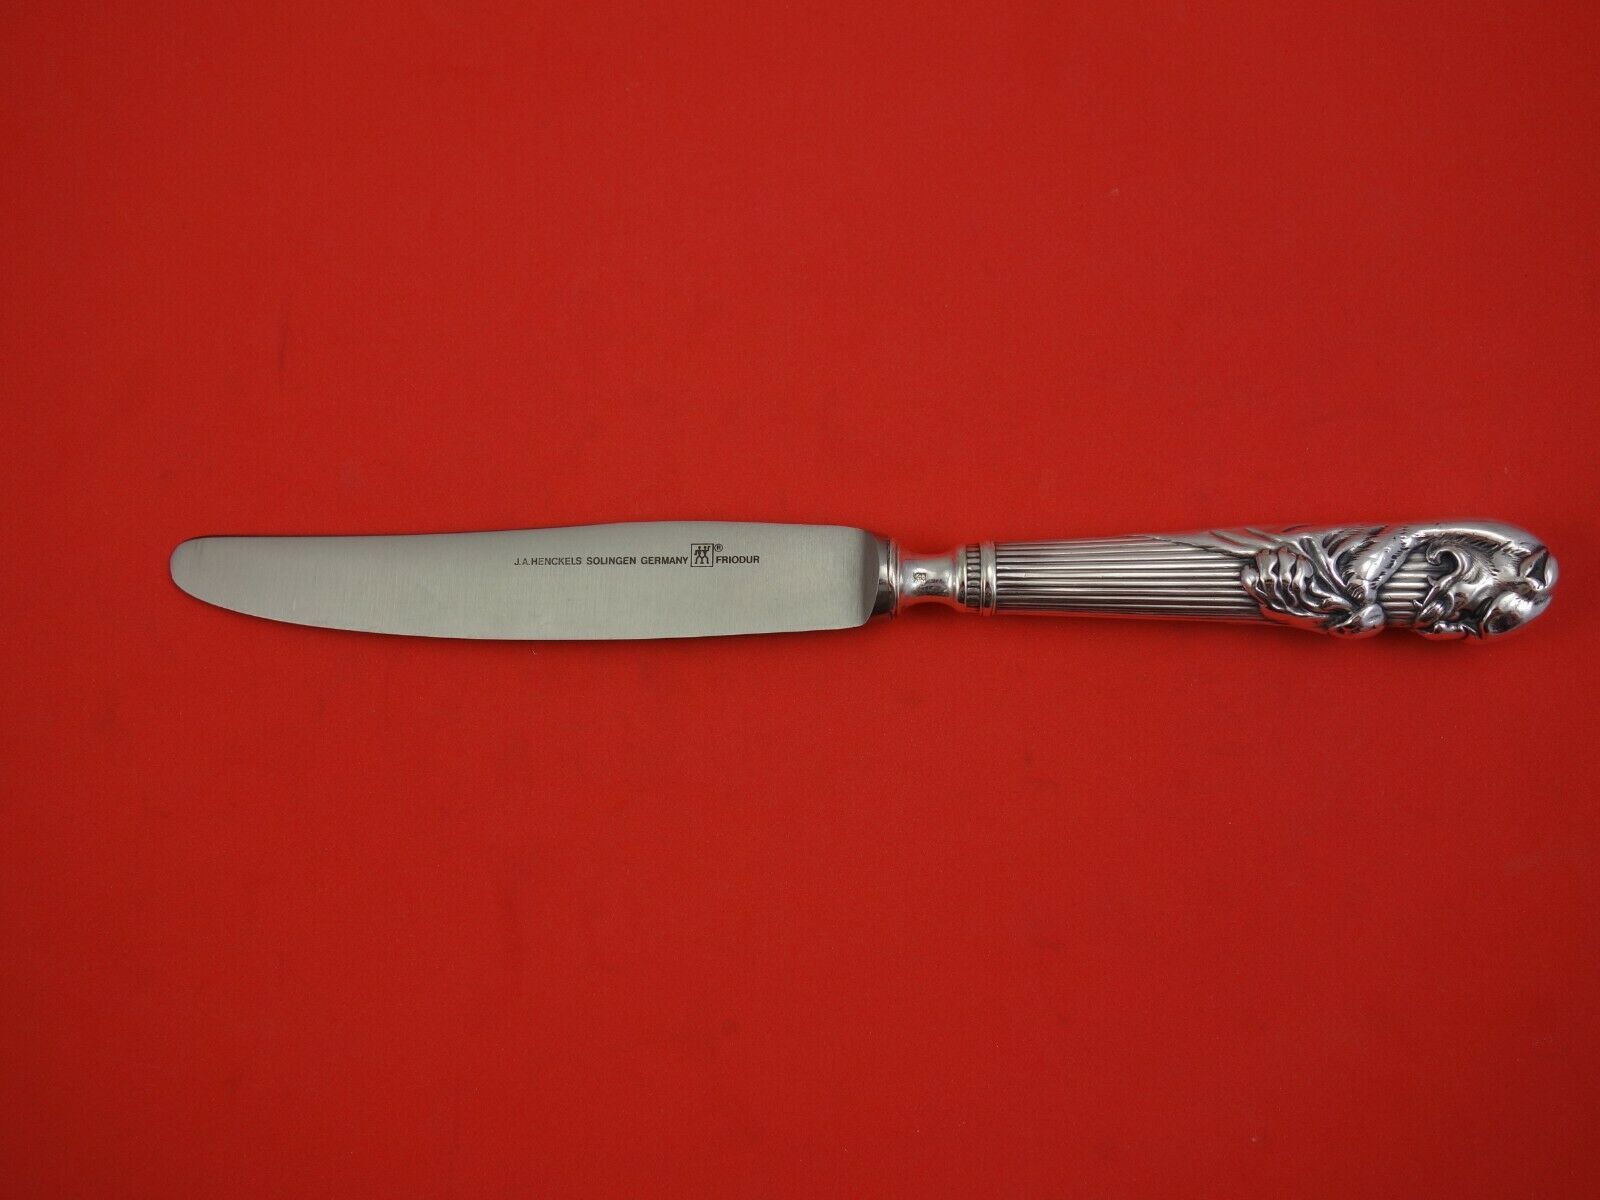 Primary image for Peau de Lion by Christofle Silverplate Dinner Knife J.A. Henckels German Blade